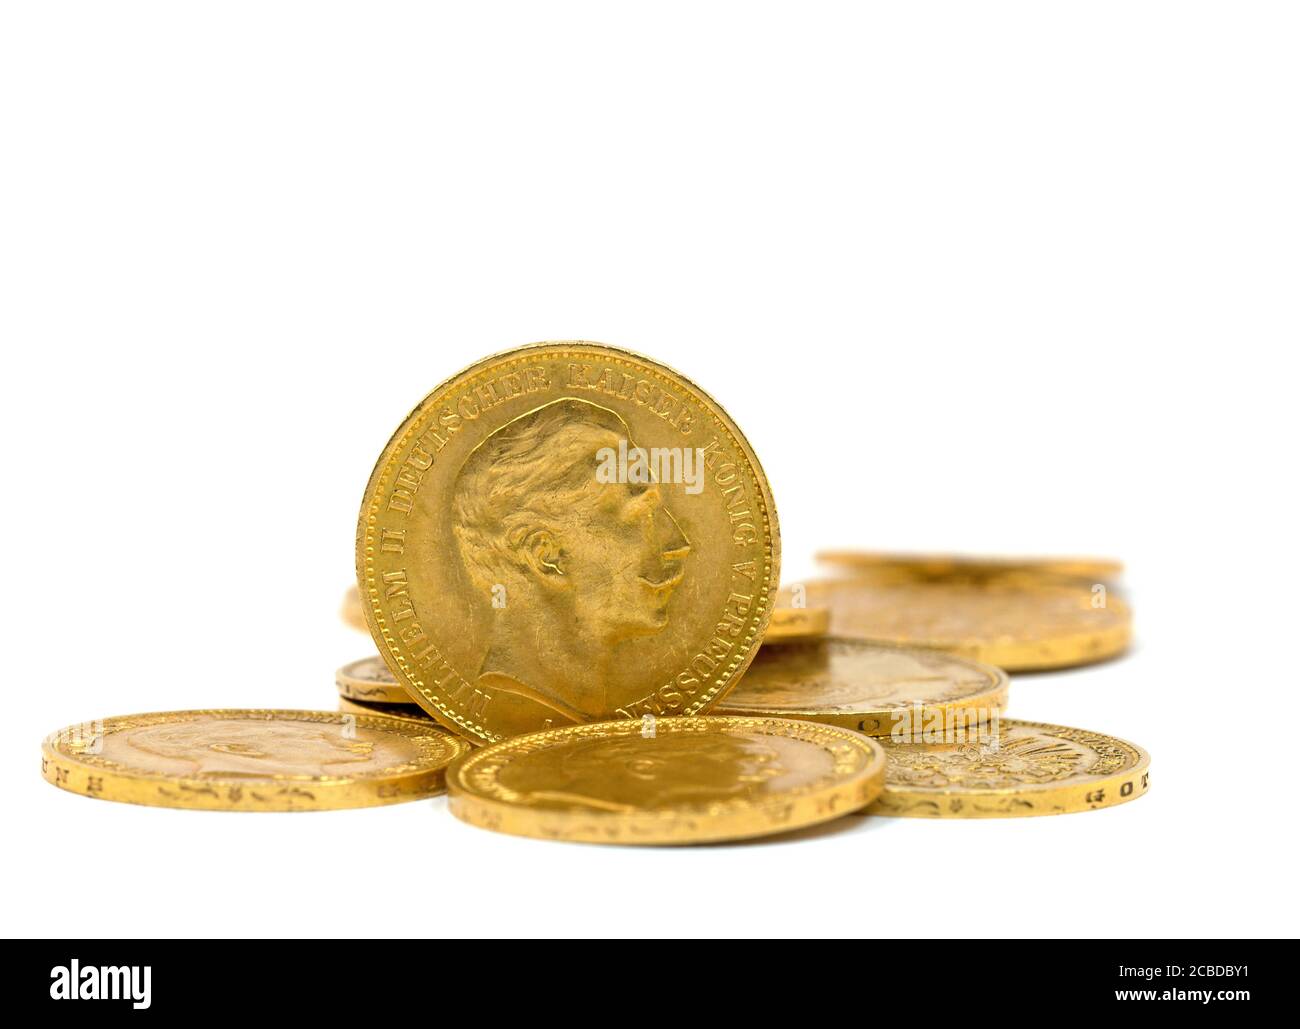 Old German gold coins against a white background Stock Photo